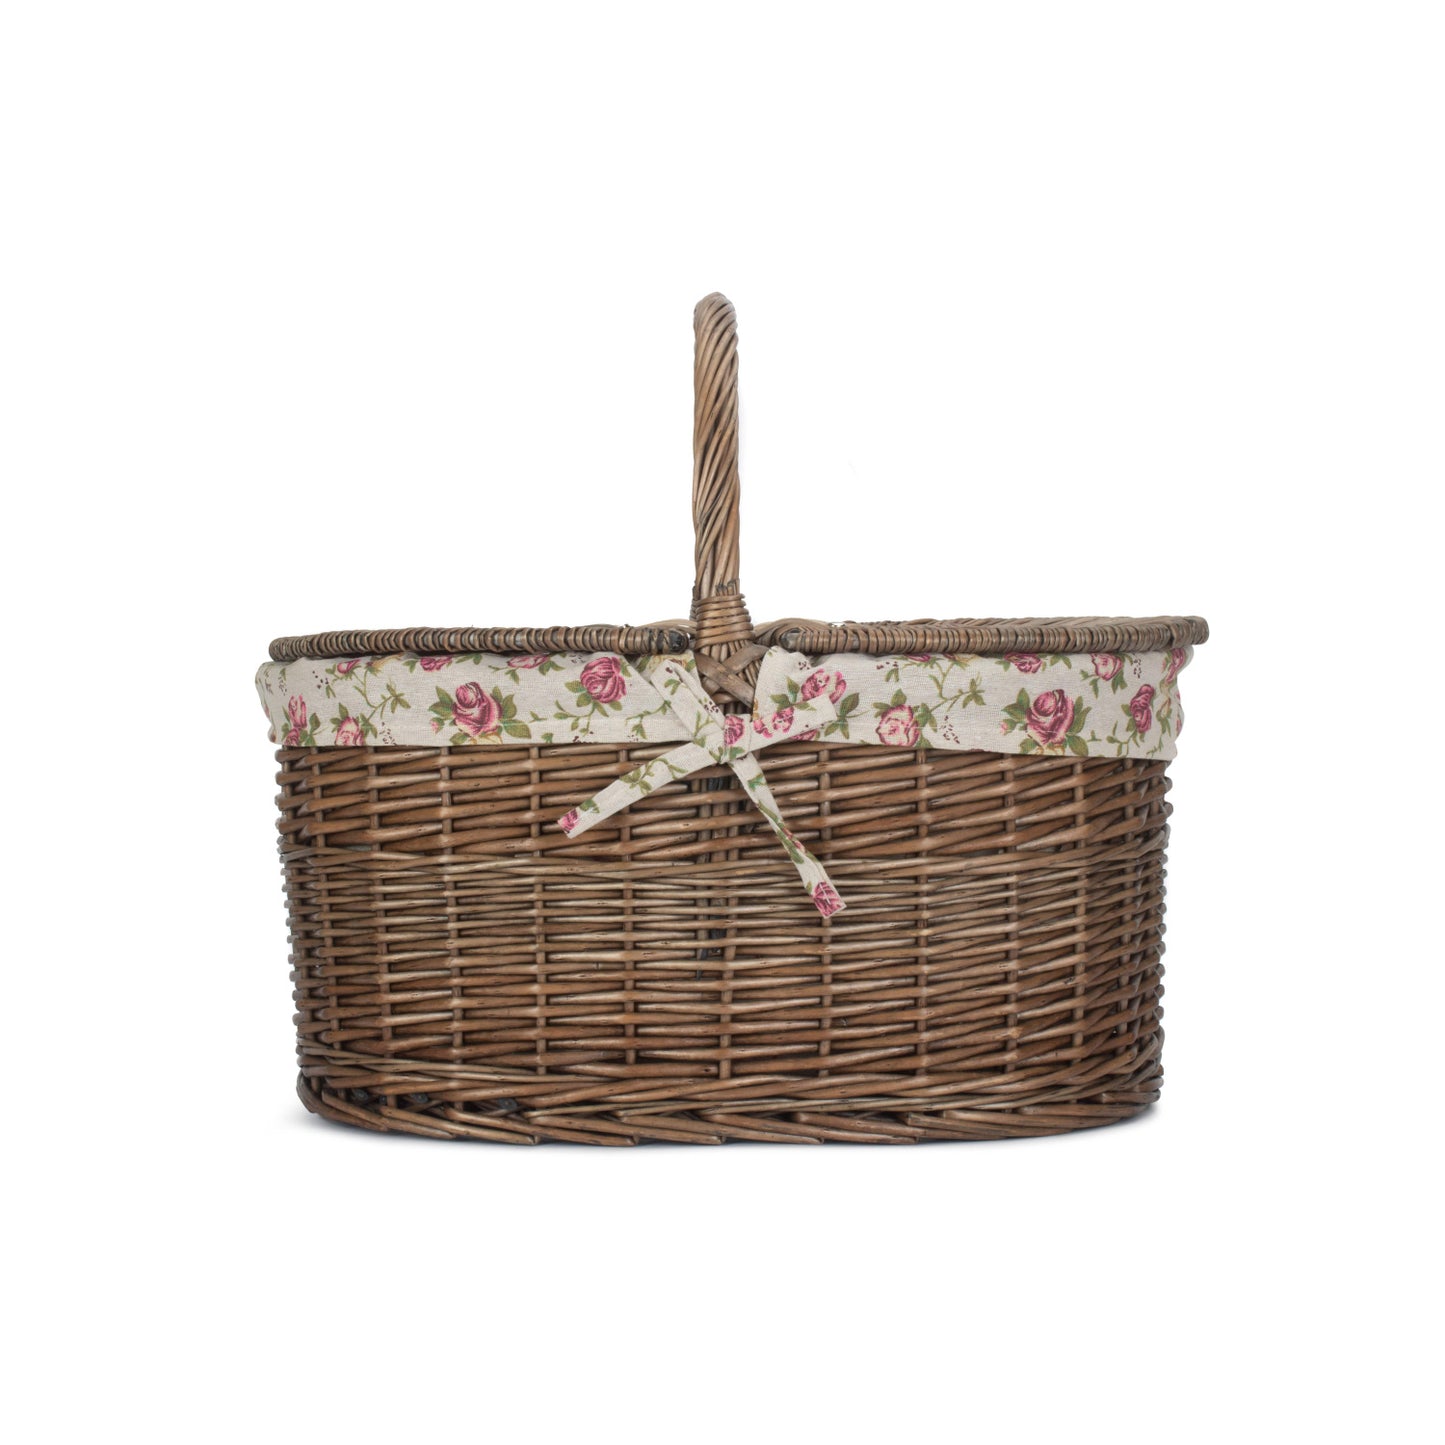 Deep Antique Wash Oval Picnic Basket With Garden Rose Lining